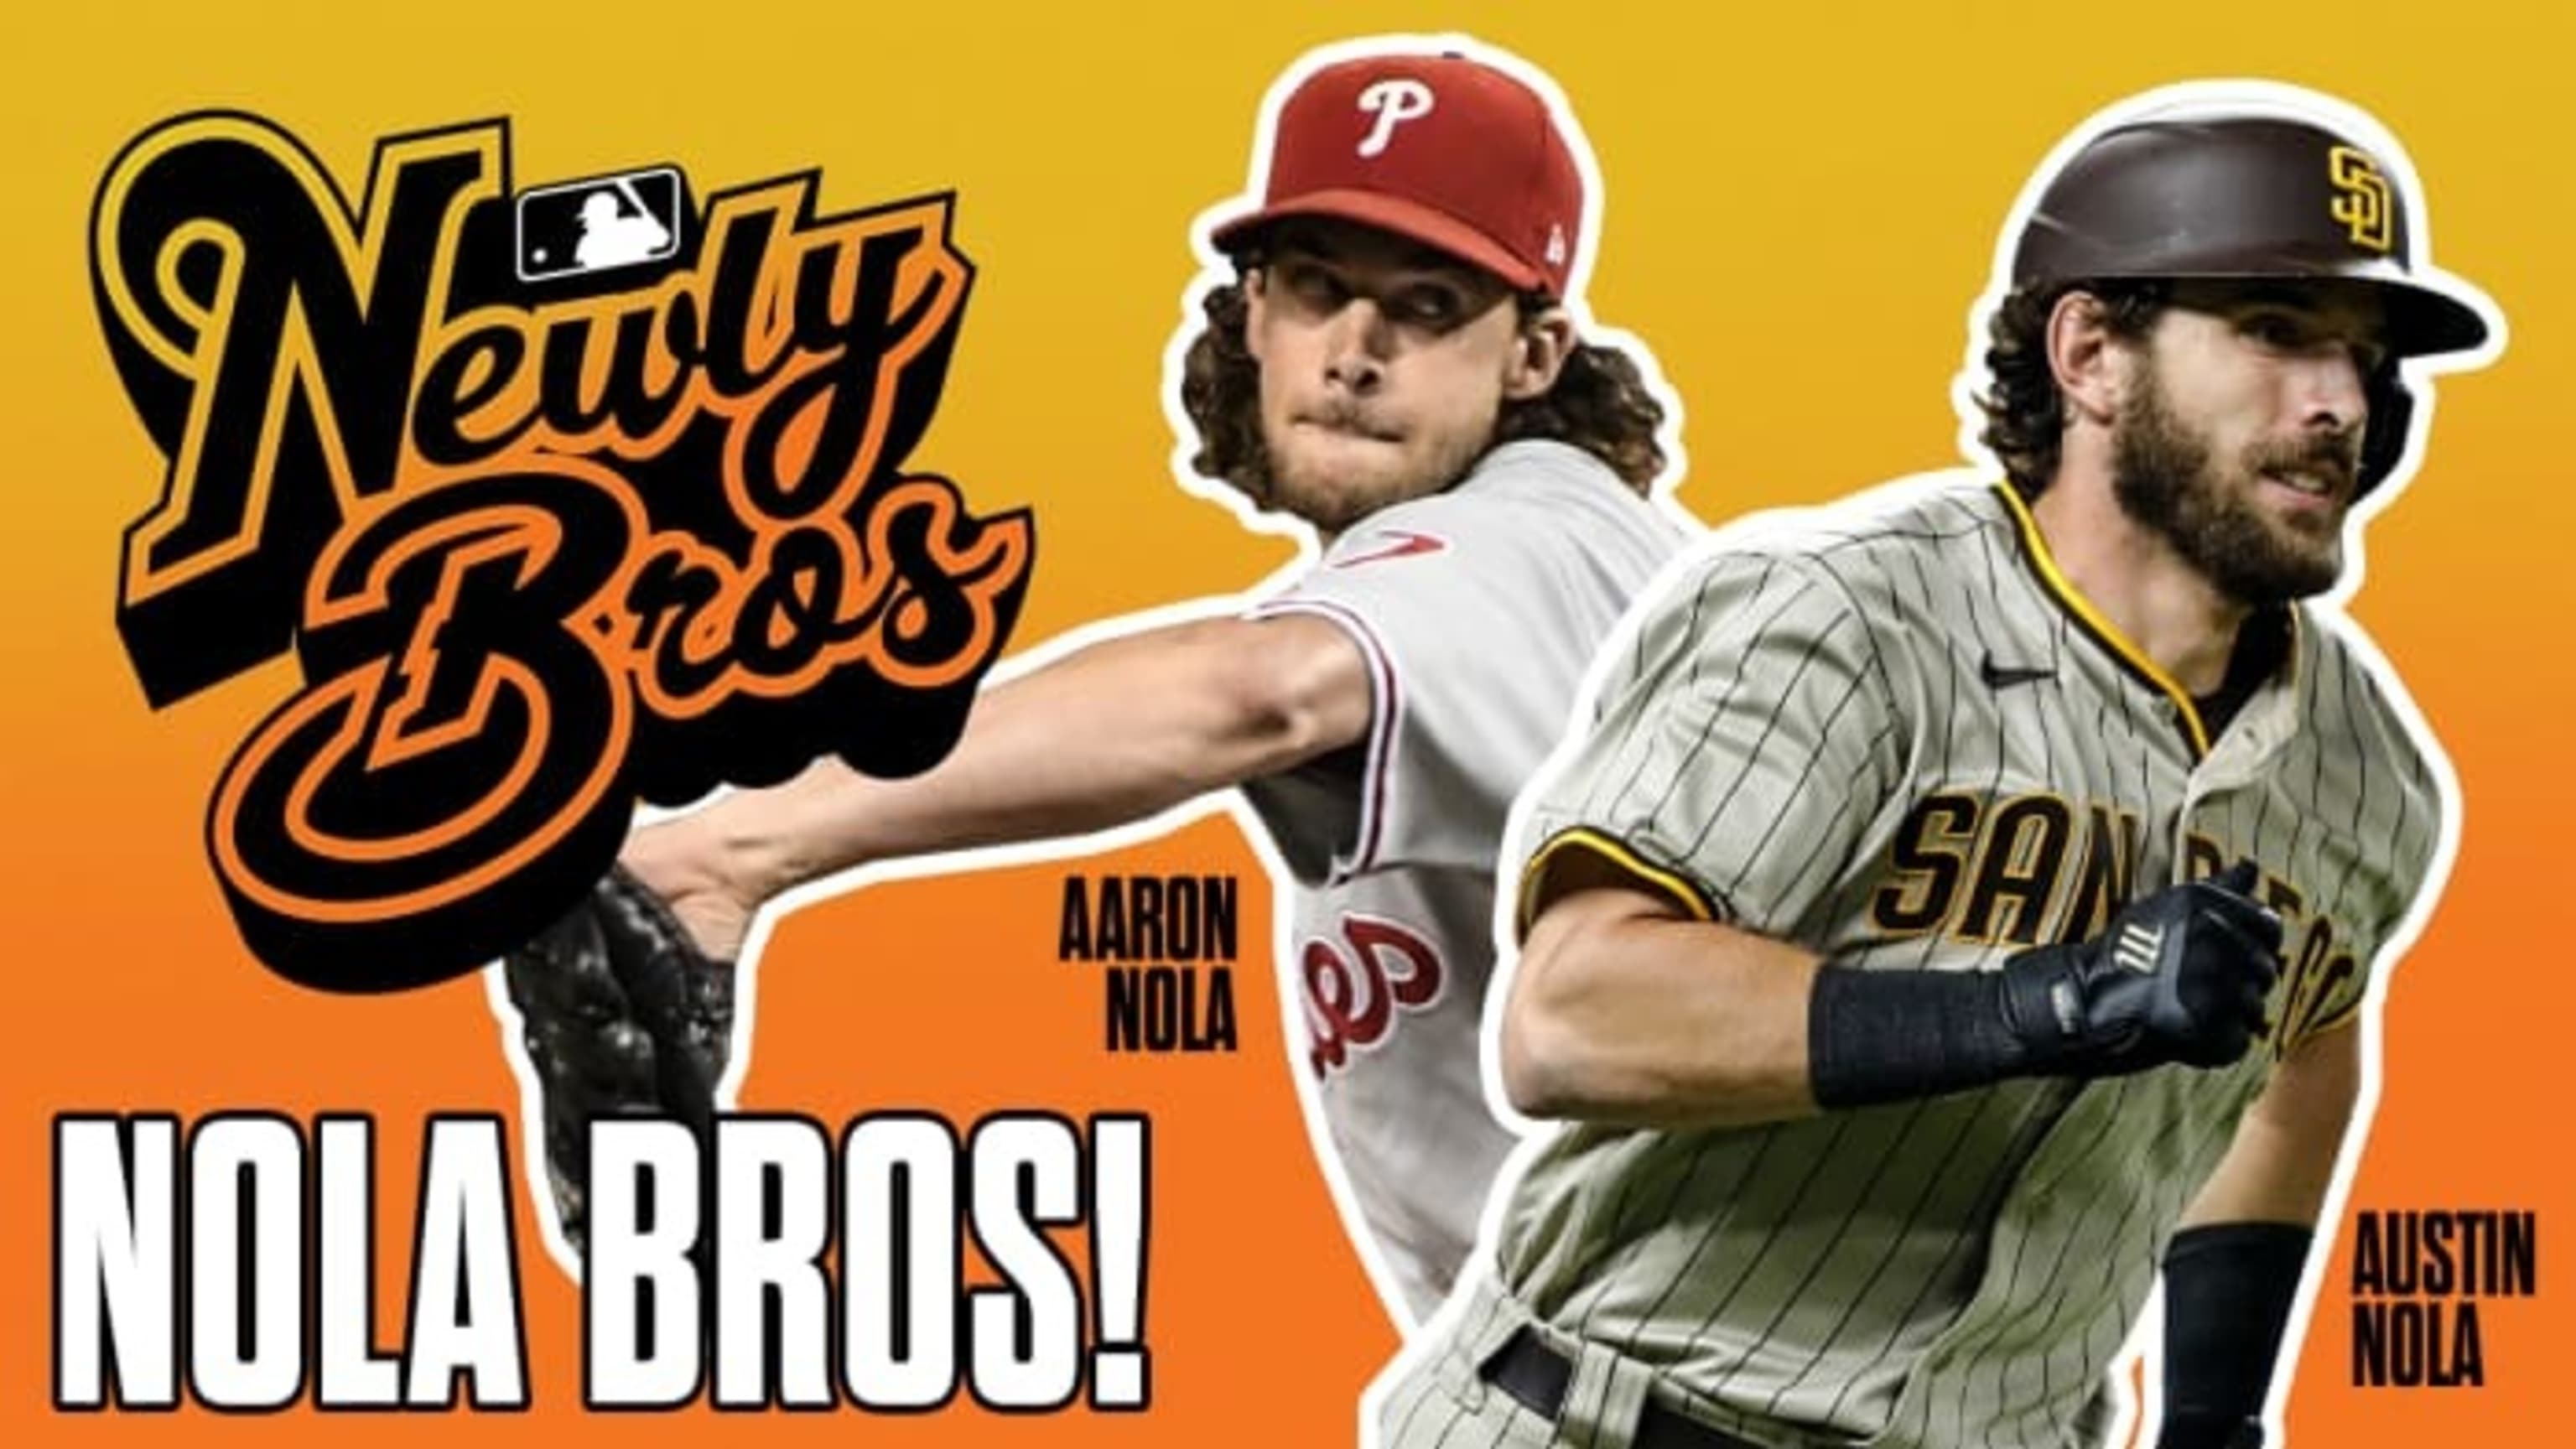 Nola vs Nola: Brothers Aaron and Austin's Family Face Off Set to be an  Intriguing NLCS subplot